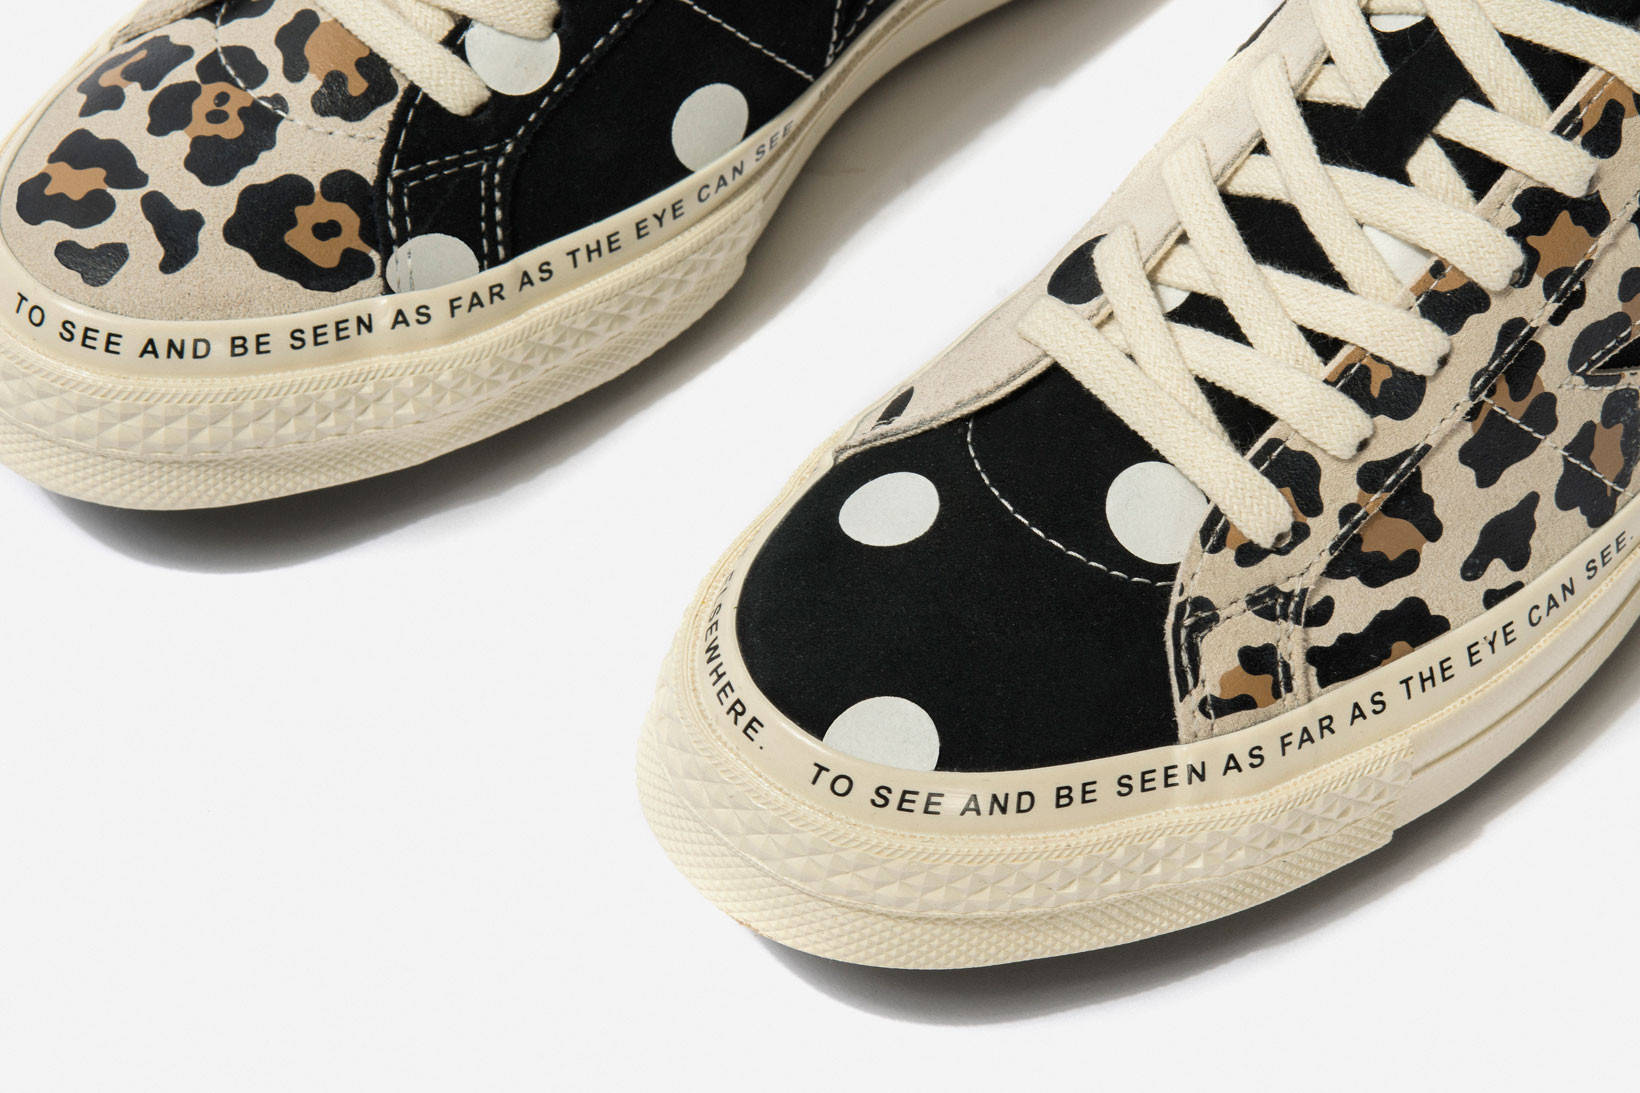 Brain Dead x Converse Reunite To Create A Patterned One Star | The Sole ...